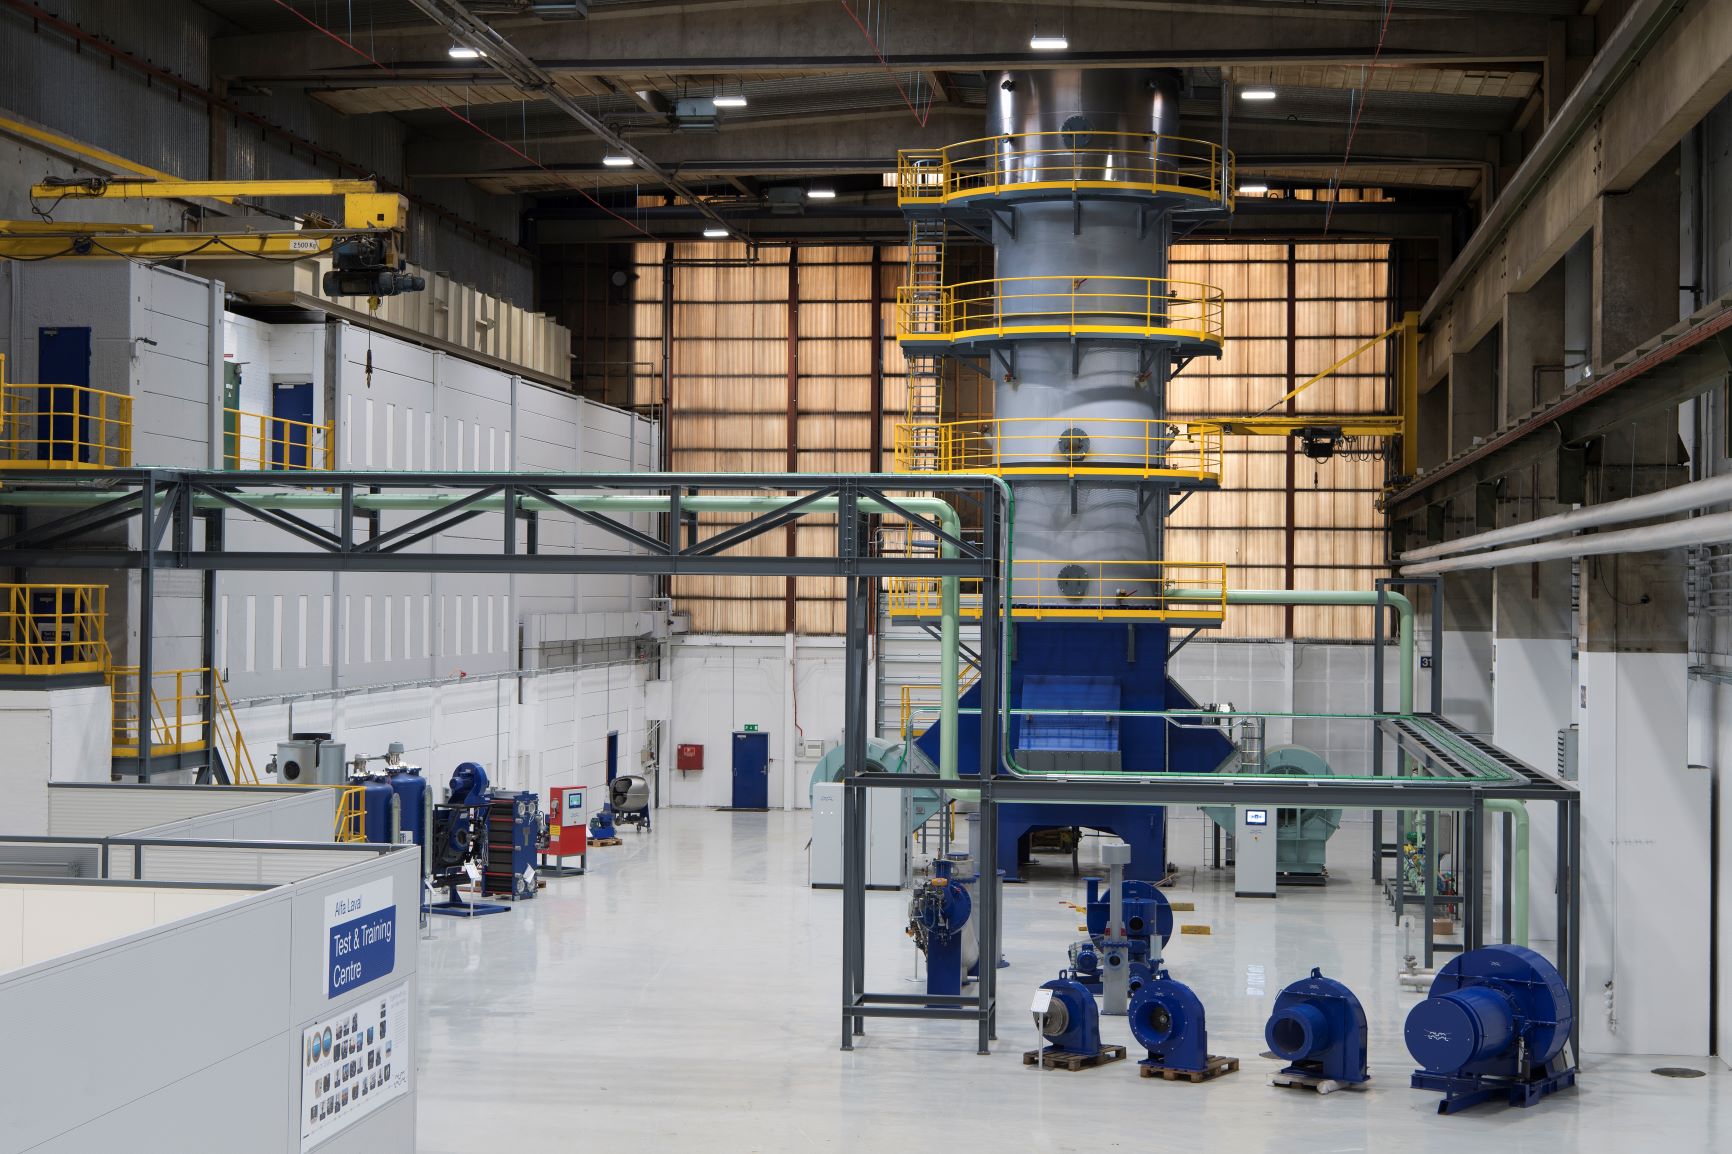 Alfa Laval Gas Combustion Unit in the Alfa Laval Test & Training Centre